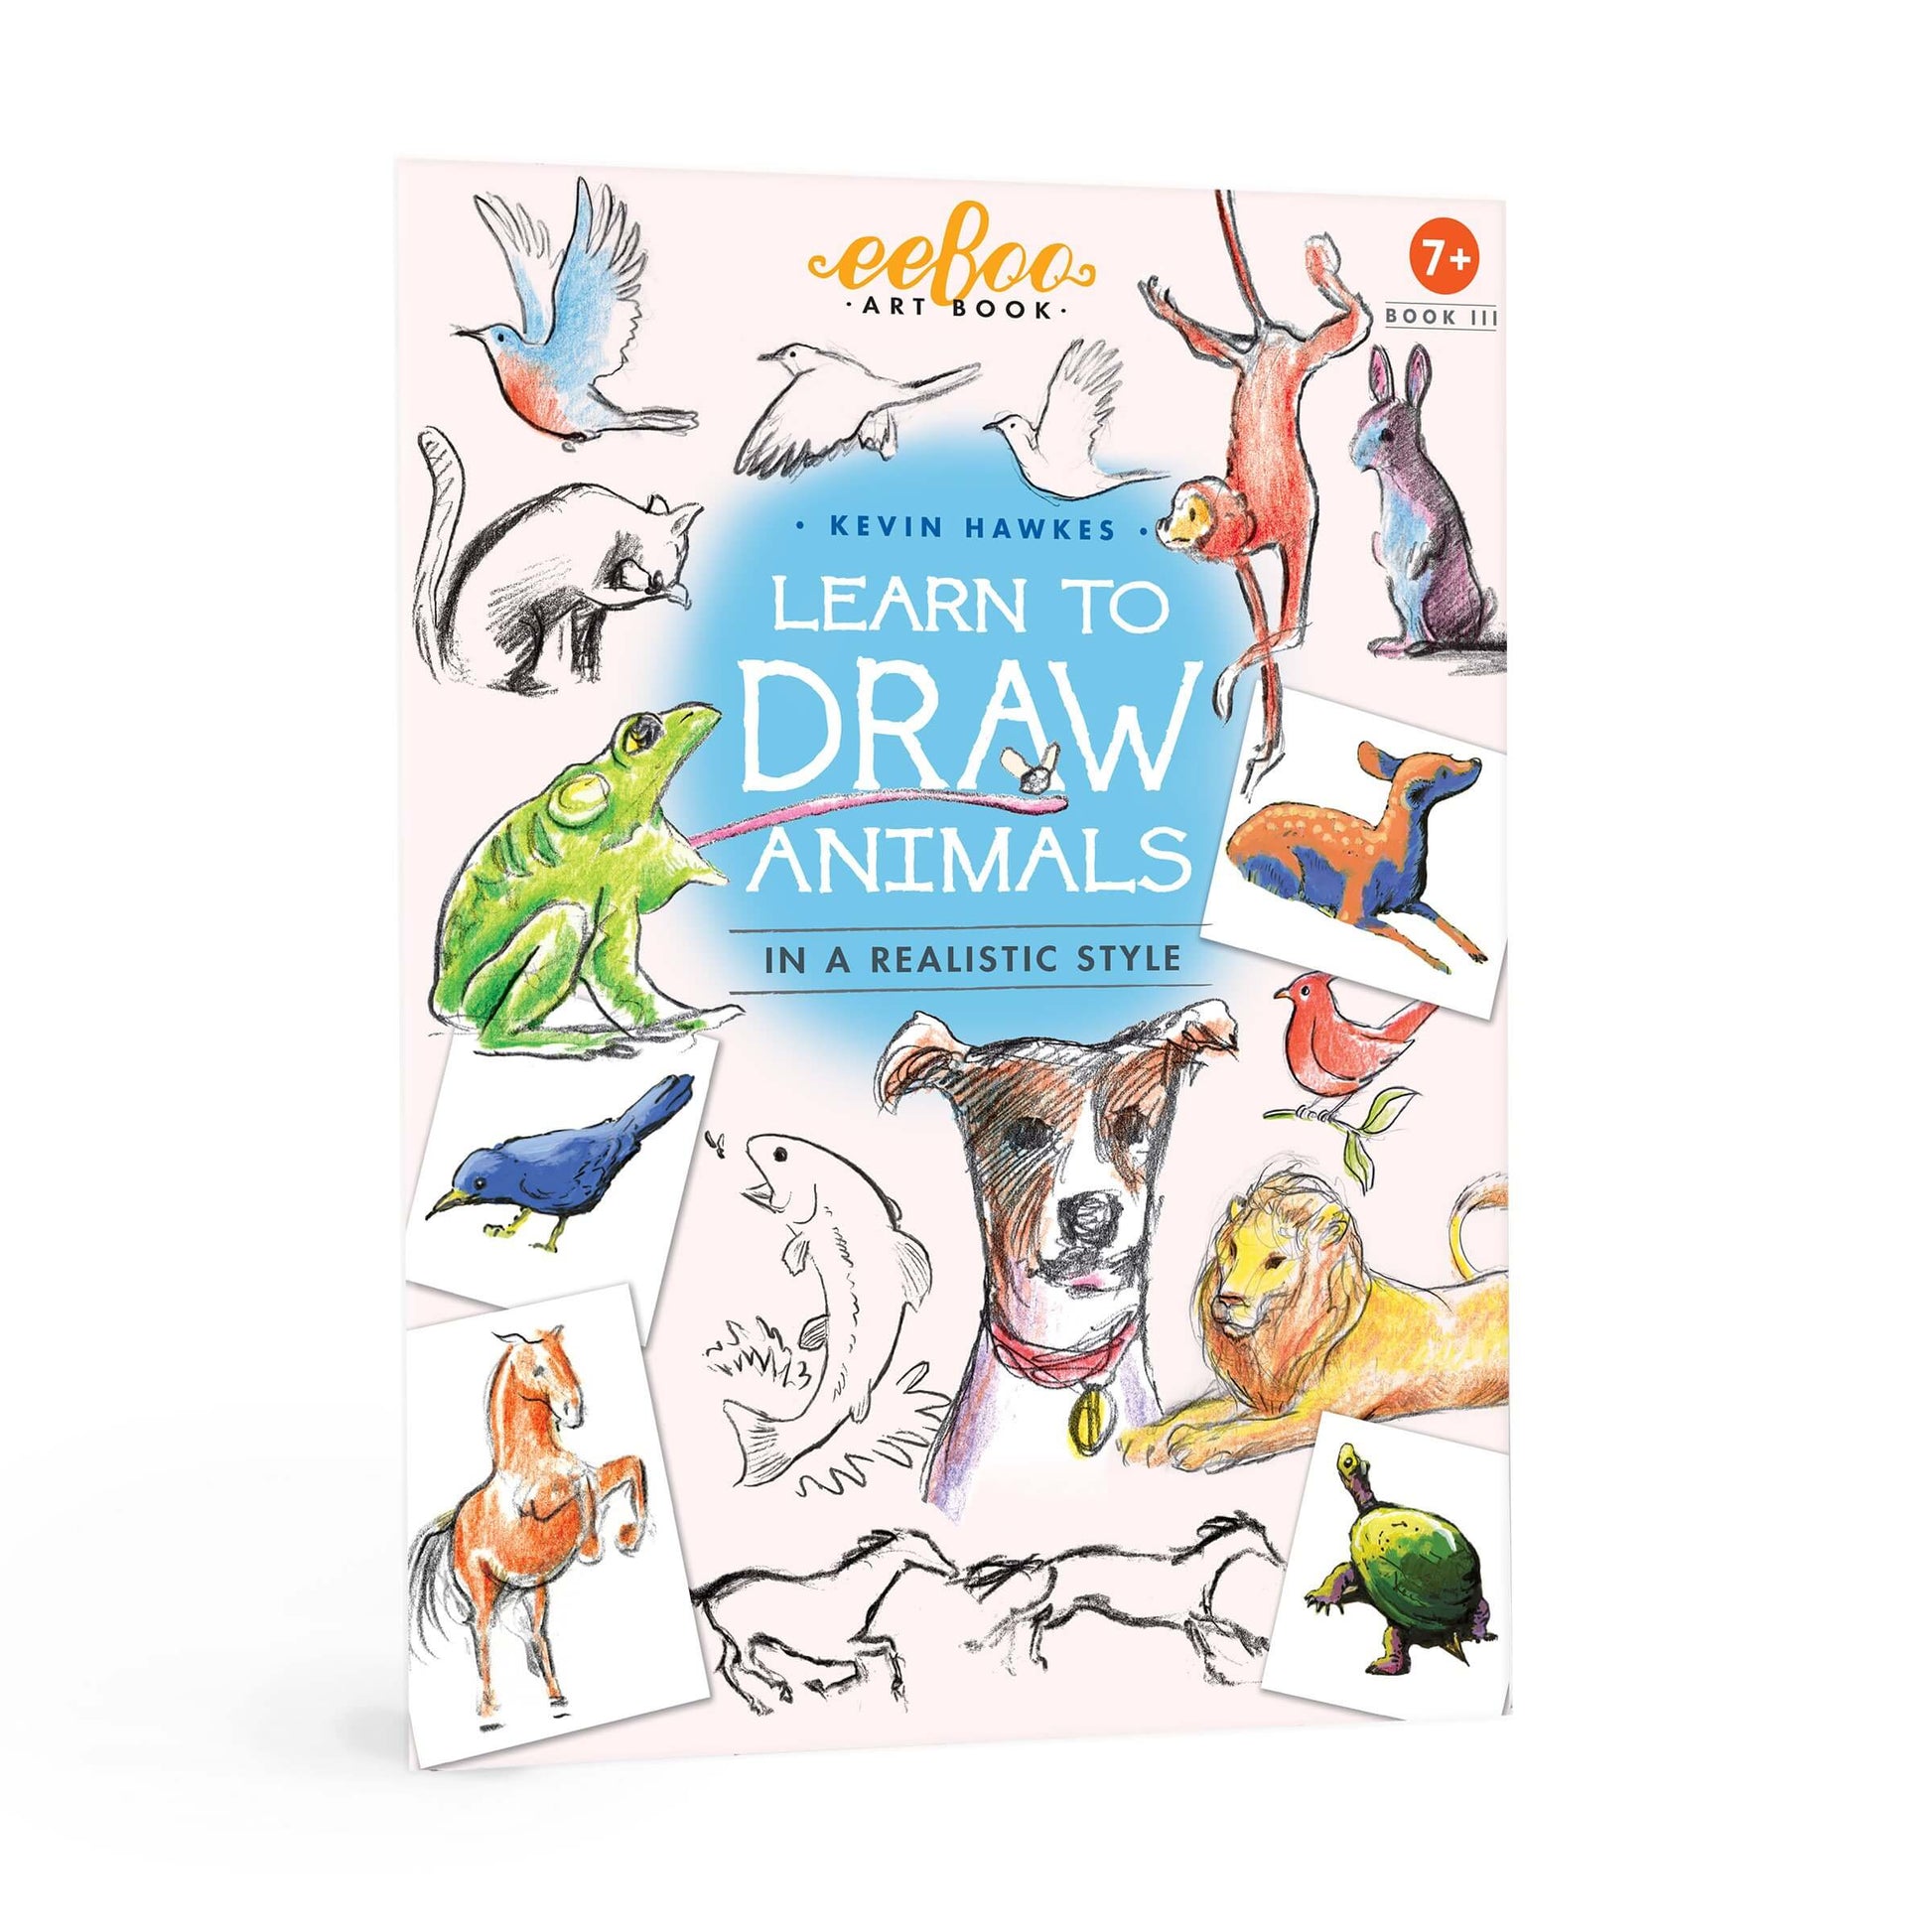 Learn to Draw Animals with Kevin Hawkes by eeBoo Kids Eeboo Prettycleanshop